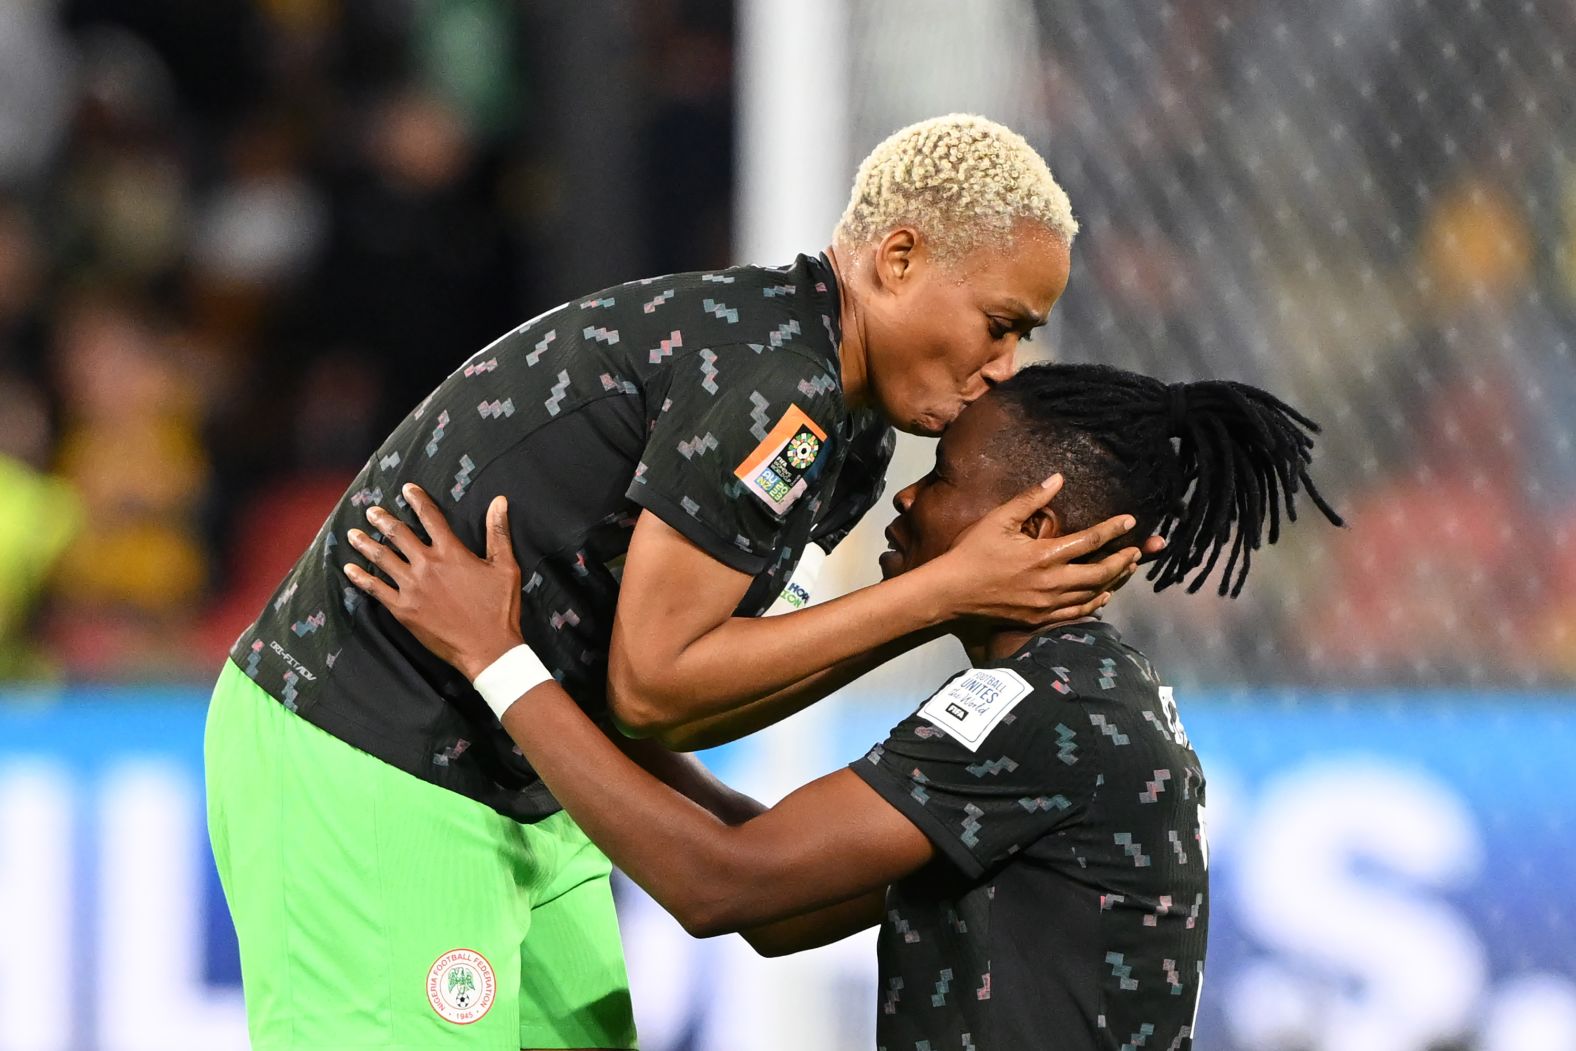 Onome Ebi, left, and Osinachi Ohale celebrate after <a href="index.php?page=&url=https%3A%2F%2Fwww.cnn.com%2F2023%2F07%2F27%2Ffootball%2Fnigeria-australia-womens-world-cup-spt-intl%2Findex.html" target="_blank">Nigeria defeated Australia 3-2</a> on July 27. The stunning result means Nigeria has a one-point lead going into its final group game against already eliminated Ireland, while co-host Australia faces a must-win match against Canada.